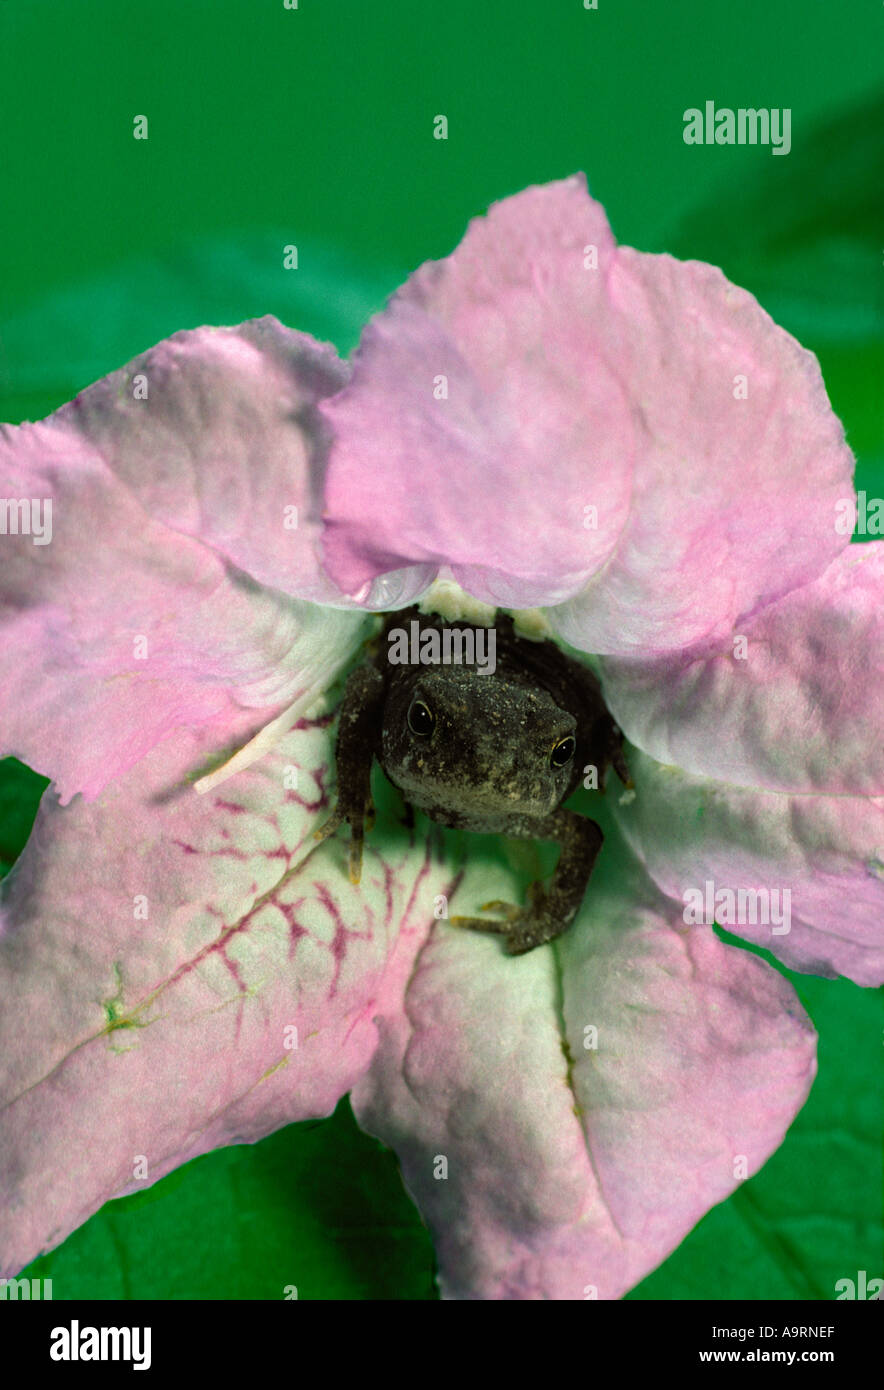 Bee surprise - serious cricket frog wearing glamorous flower gown, Ruellia, waiting to surprise some food, Midwest USA Stock Photo